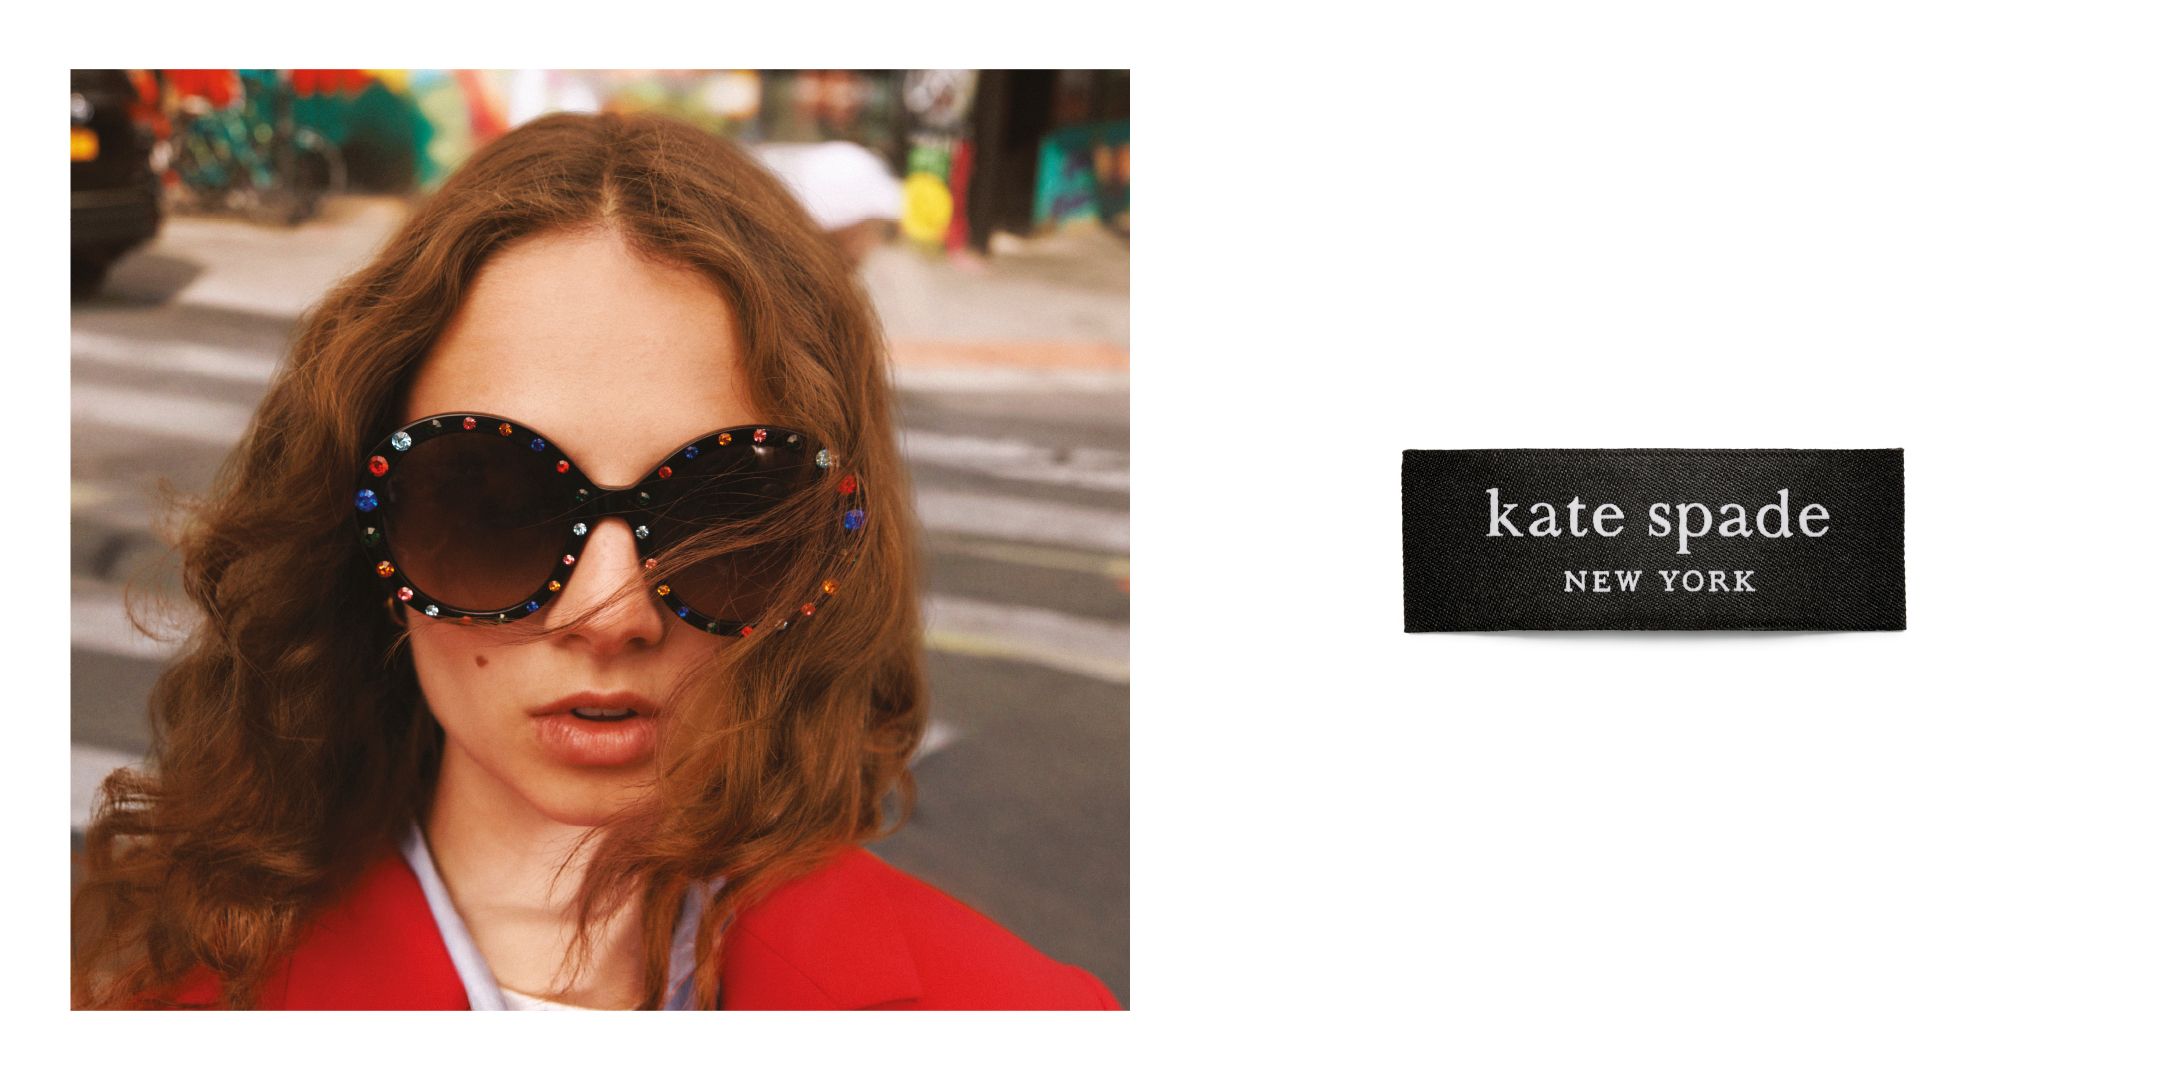 Kate spade new york - featured brand 3